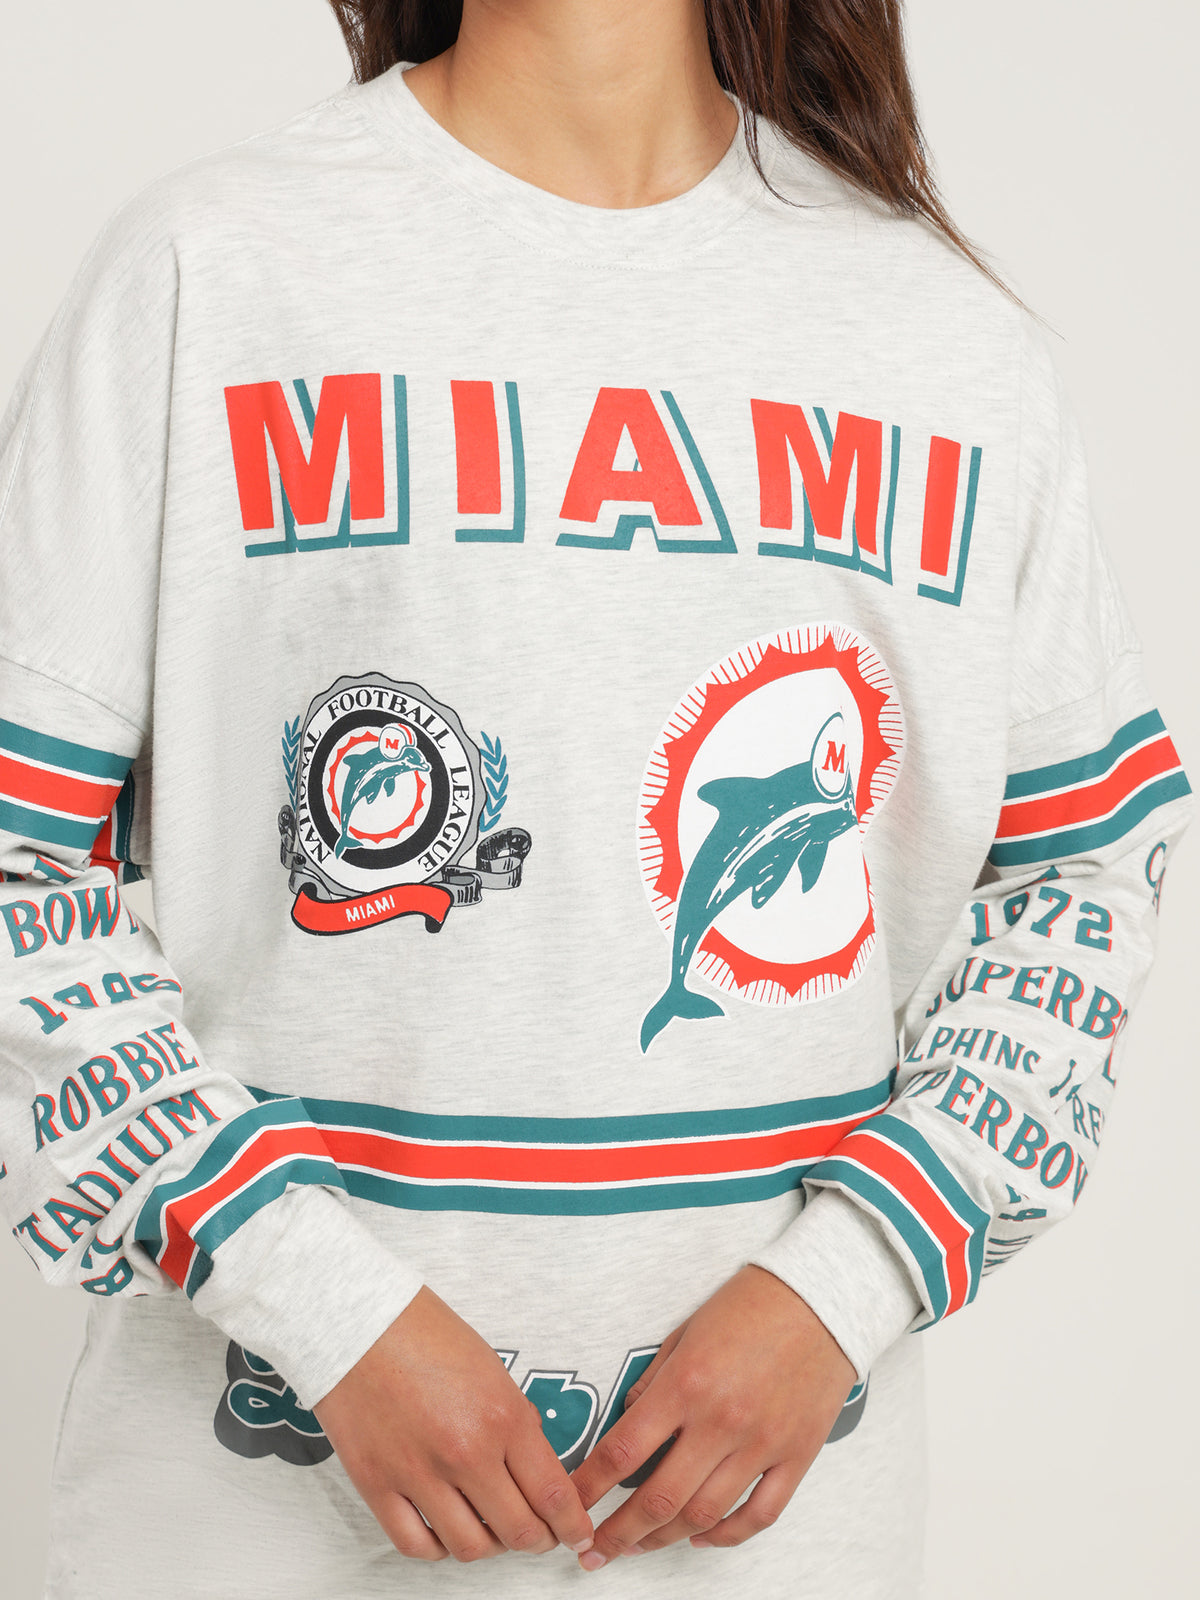 Dolphins 17 3/4 Long Sleeve Top in White Marle